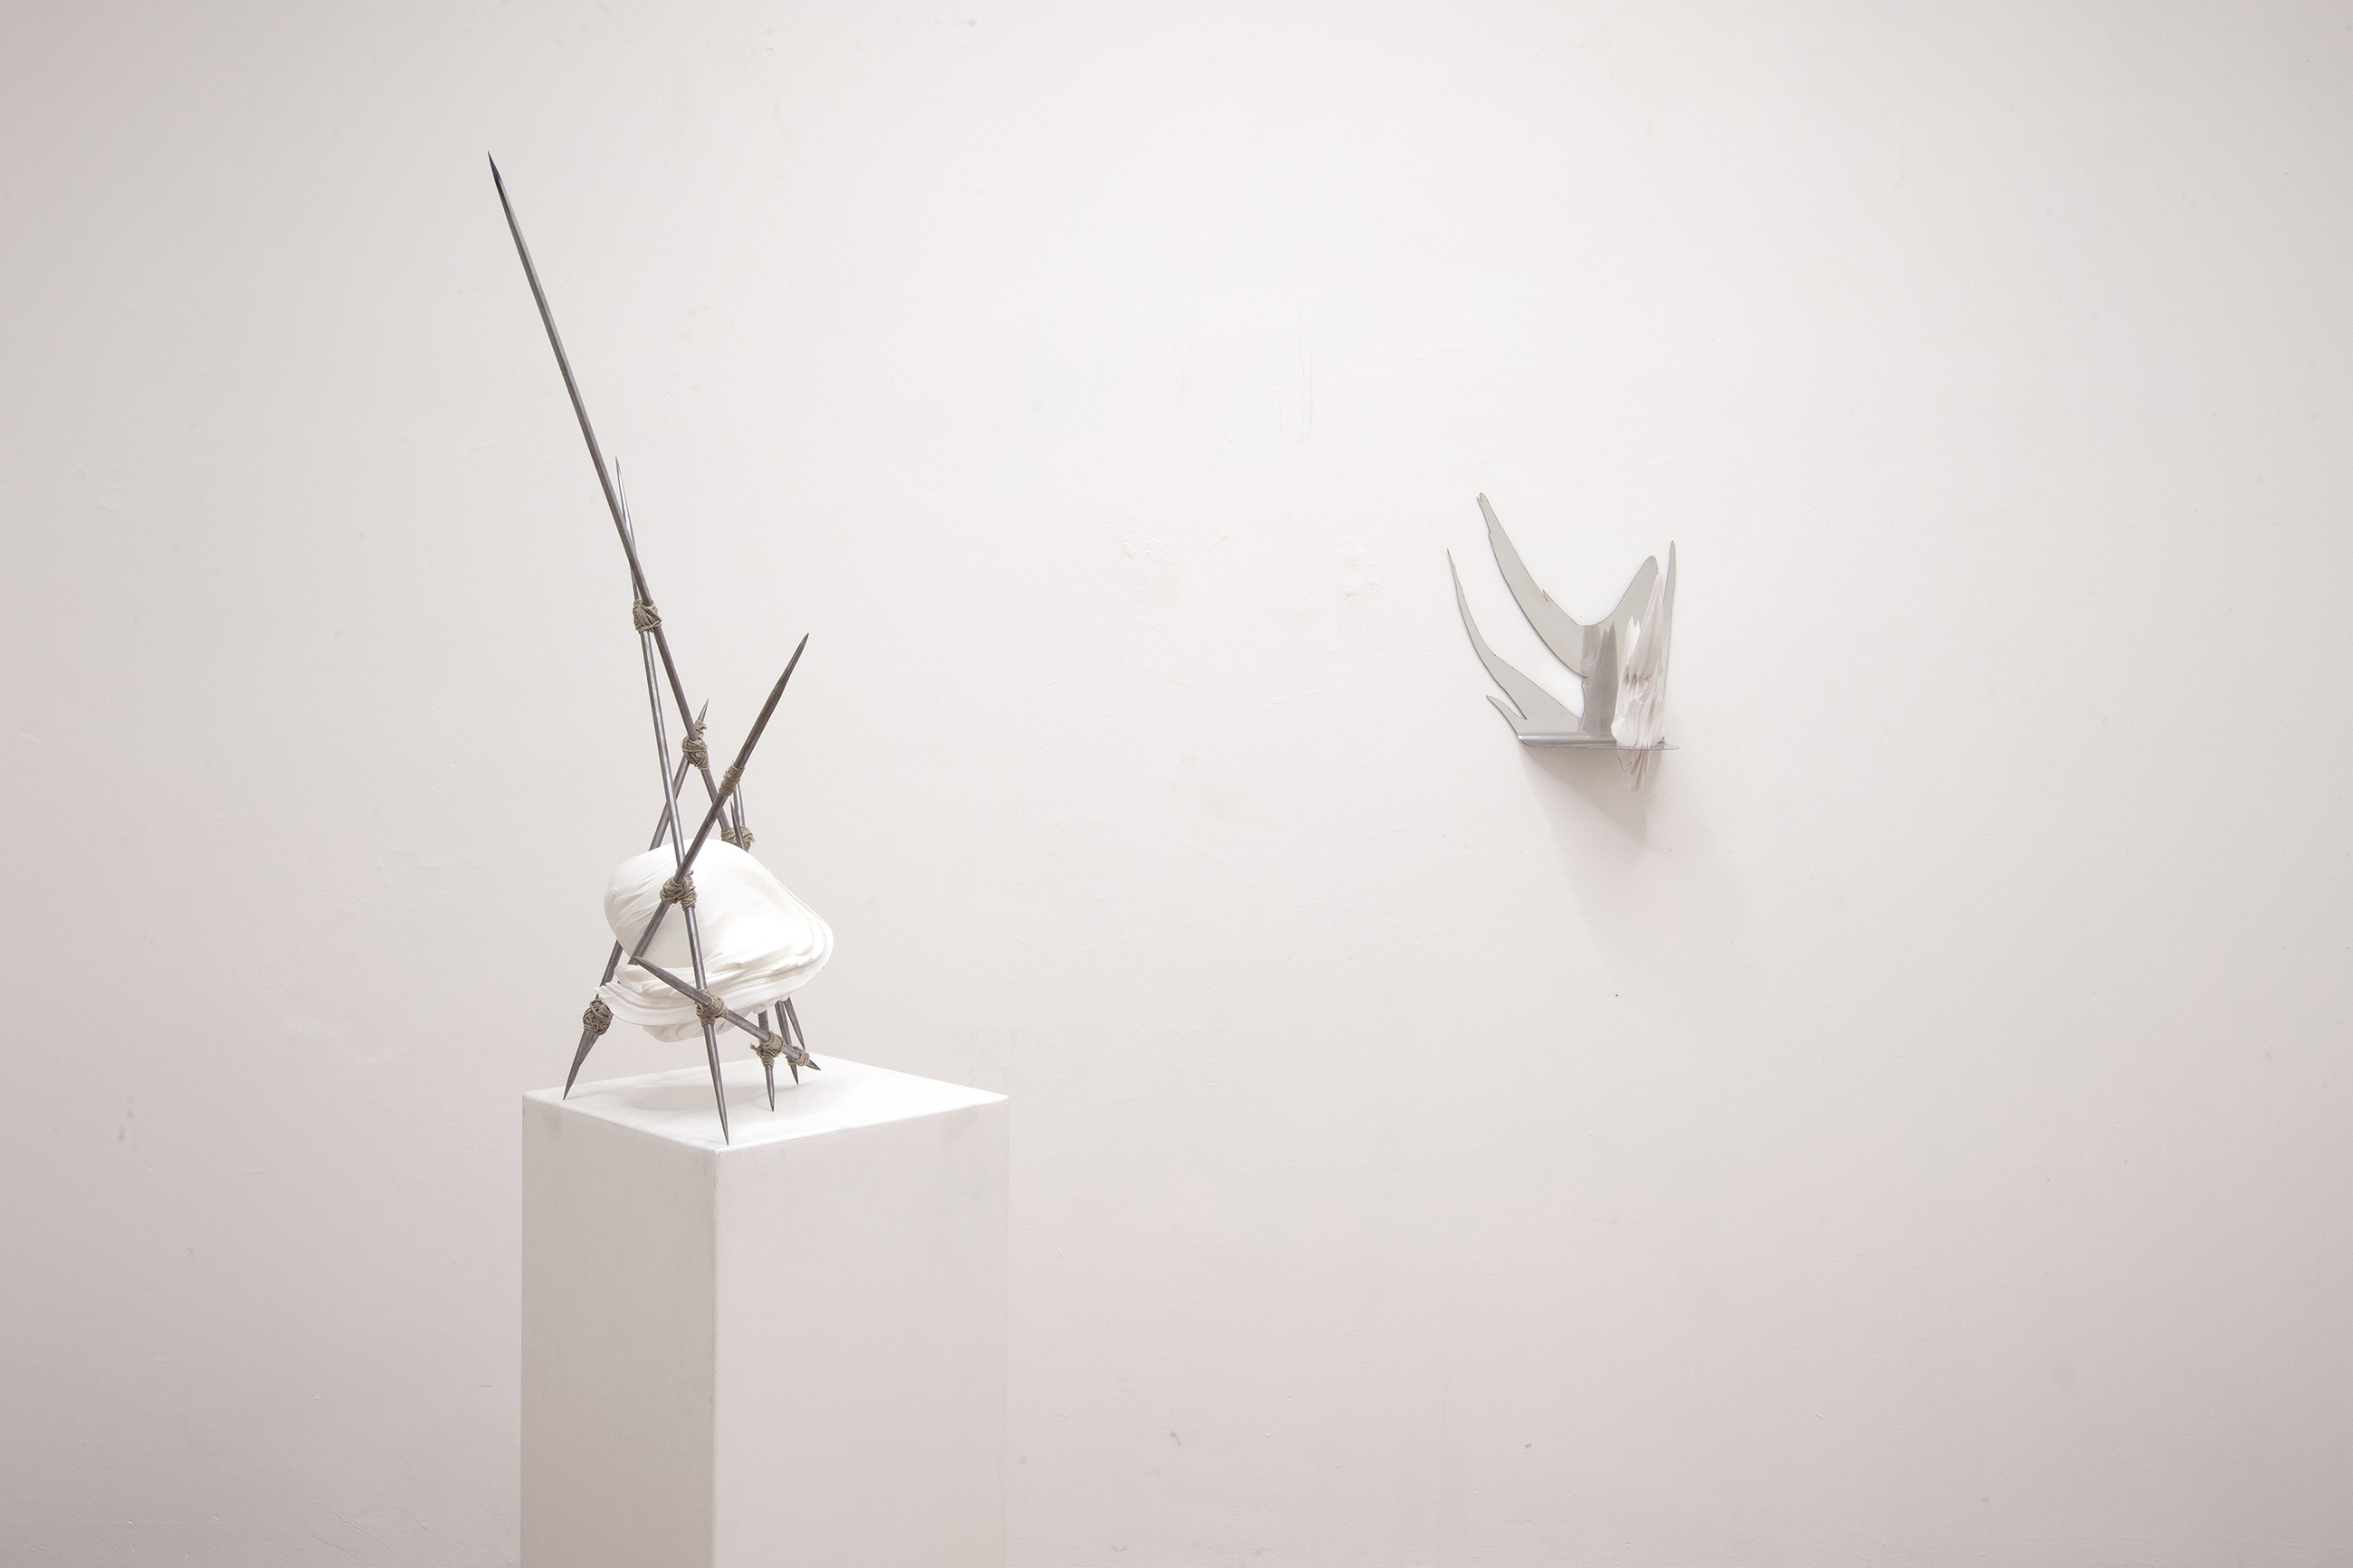 Installation view: Gregorio Vignola, Unidentified floating Obj, pla, steel and string, variable dimensions, 2024 + Gregorio Vignola, Unidentified suspended Obj, pla and steel, 20x40x25 cm, 2022